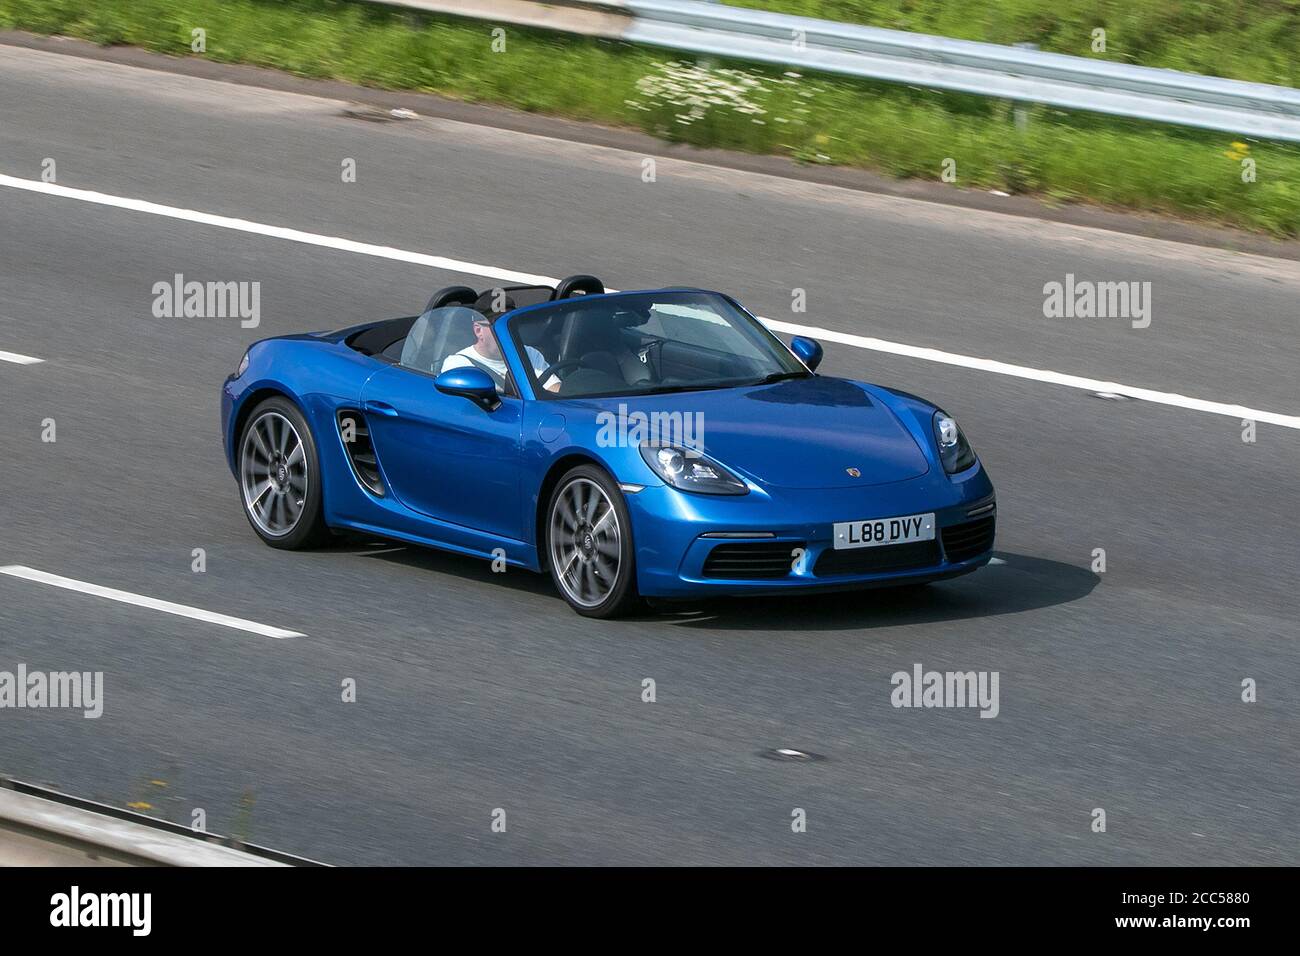 L88DVY 2018 Porsche 718 Boxster Blue Car Roadster convertible cabriolet roof down driving on the M6 motorway near Preston in Lancashire, UK. Stock Photo